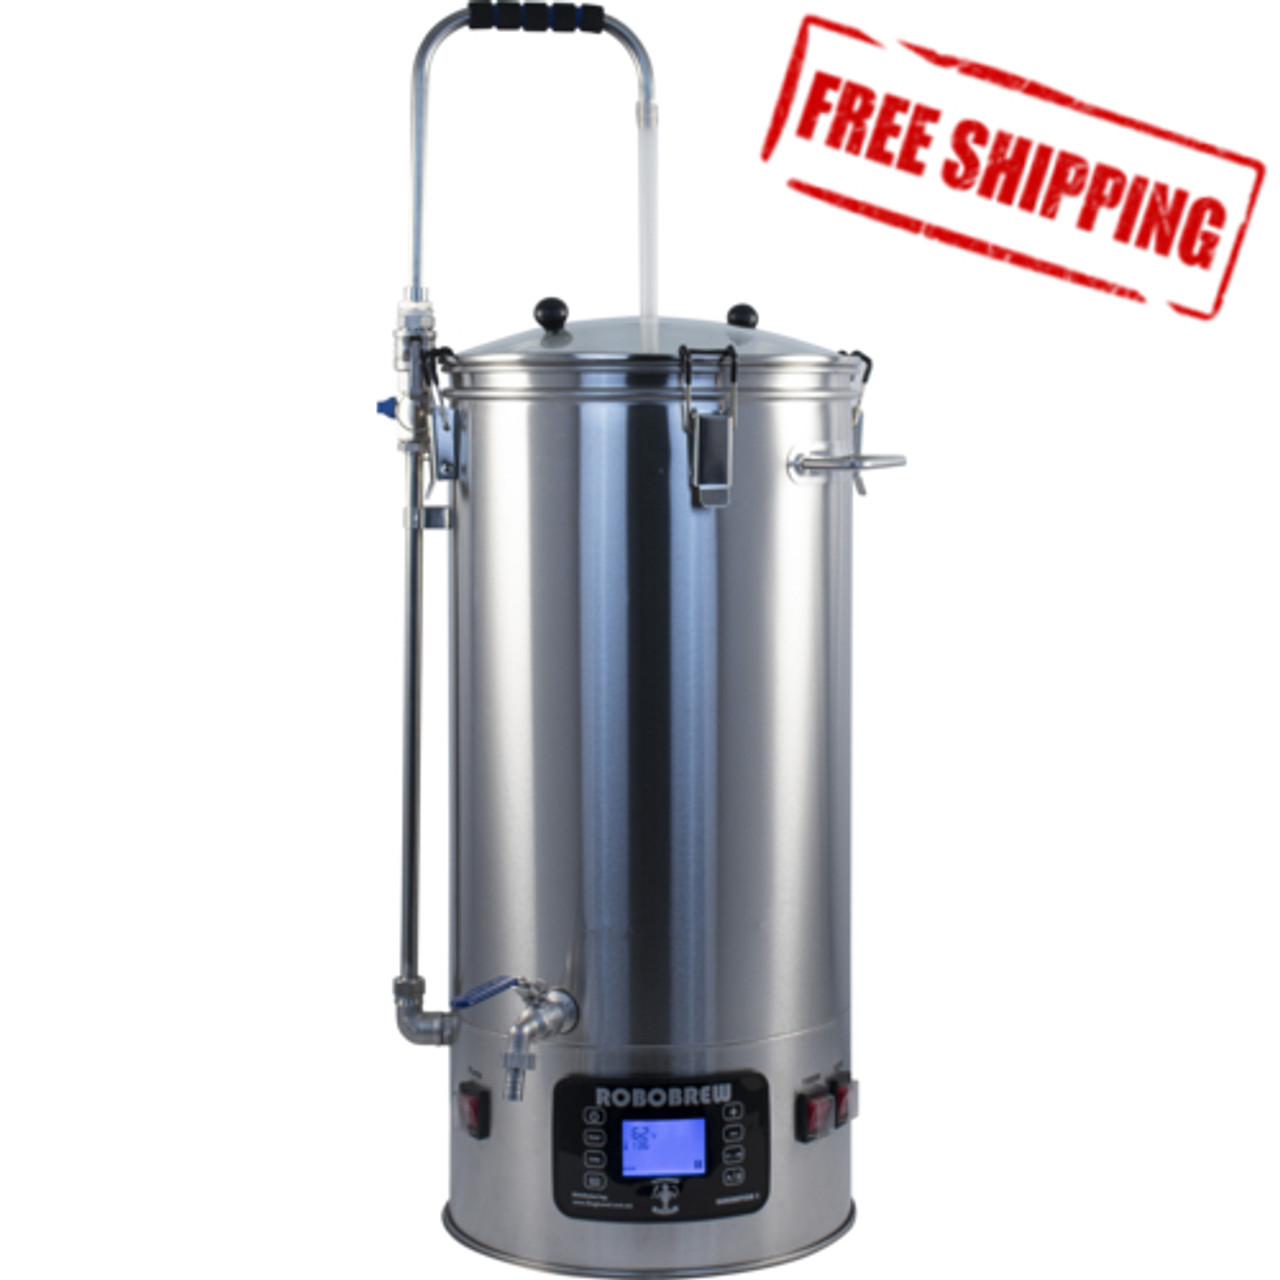 DigiBoil Electric Kettle 35L/9.25G 220v Beer Brewing Distilling All In One 